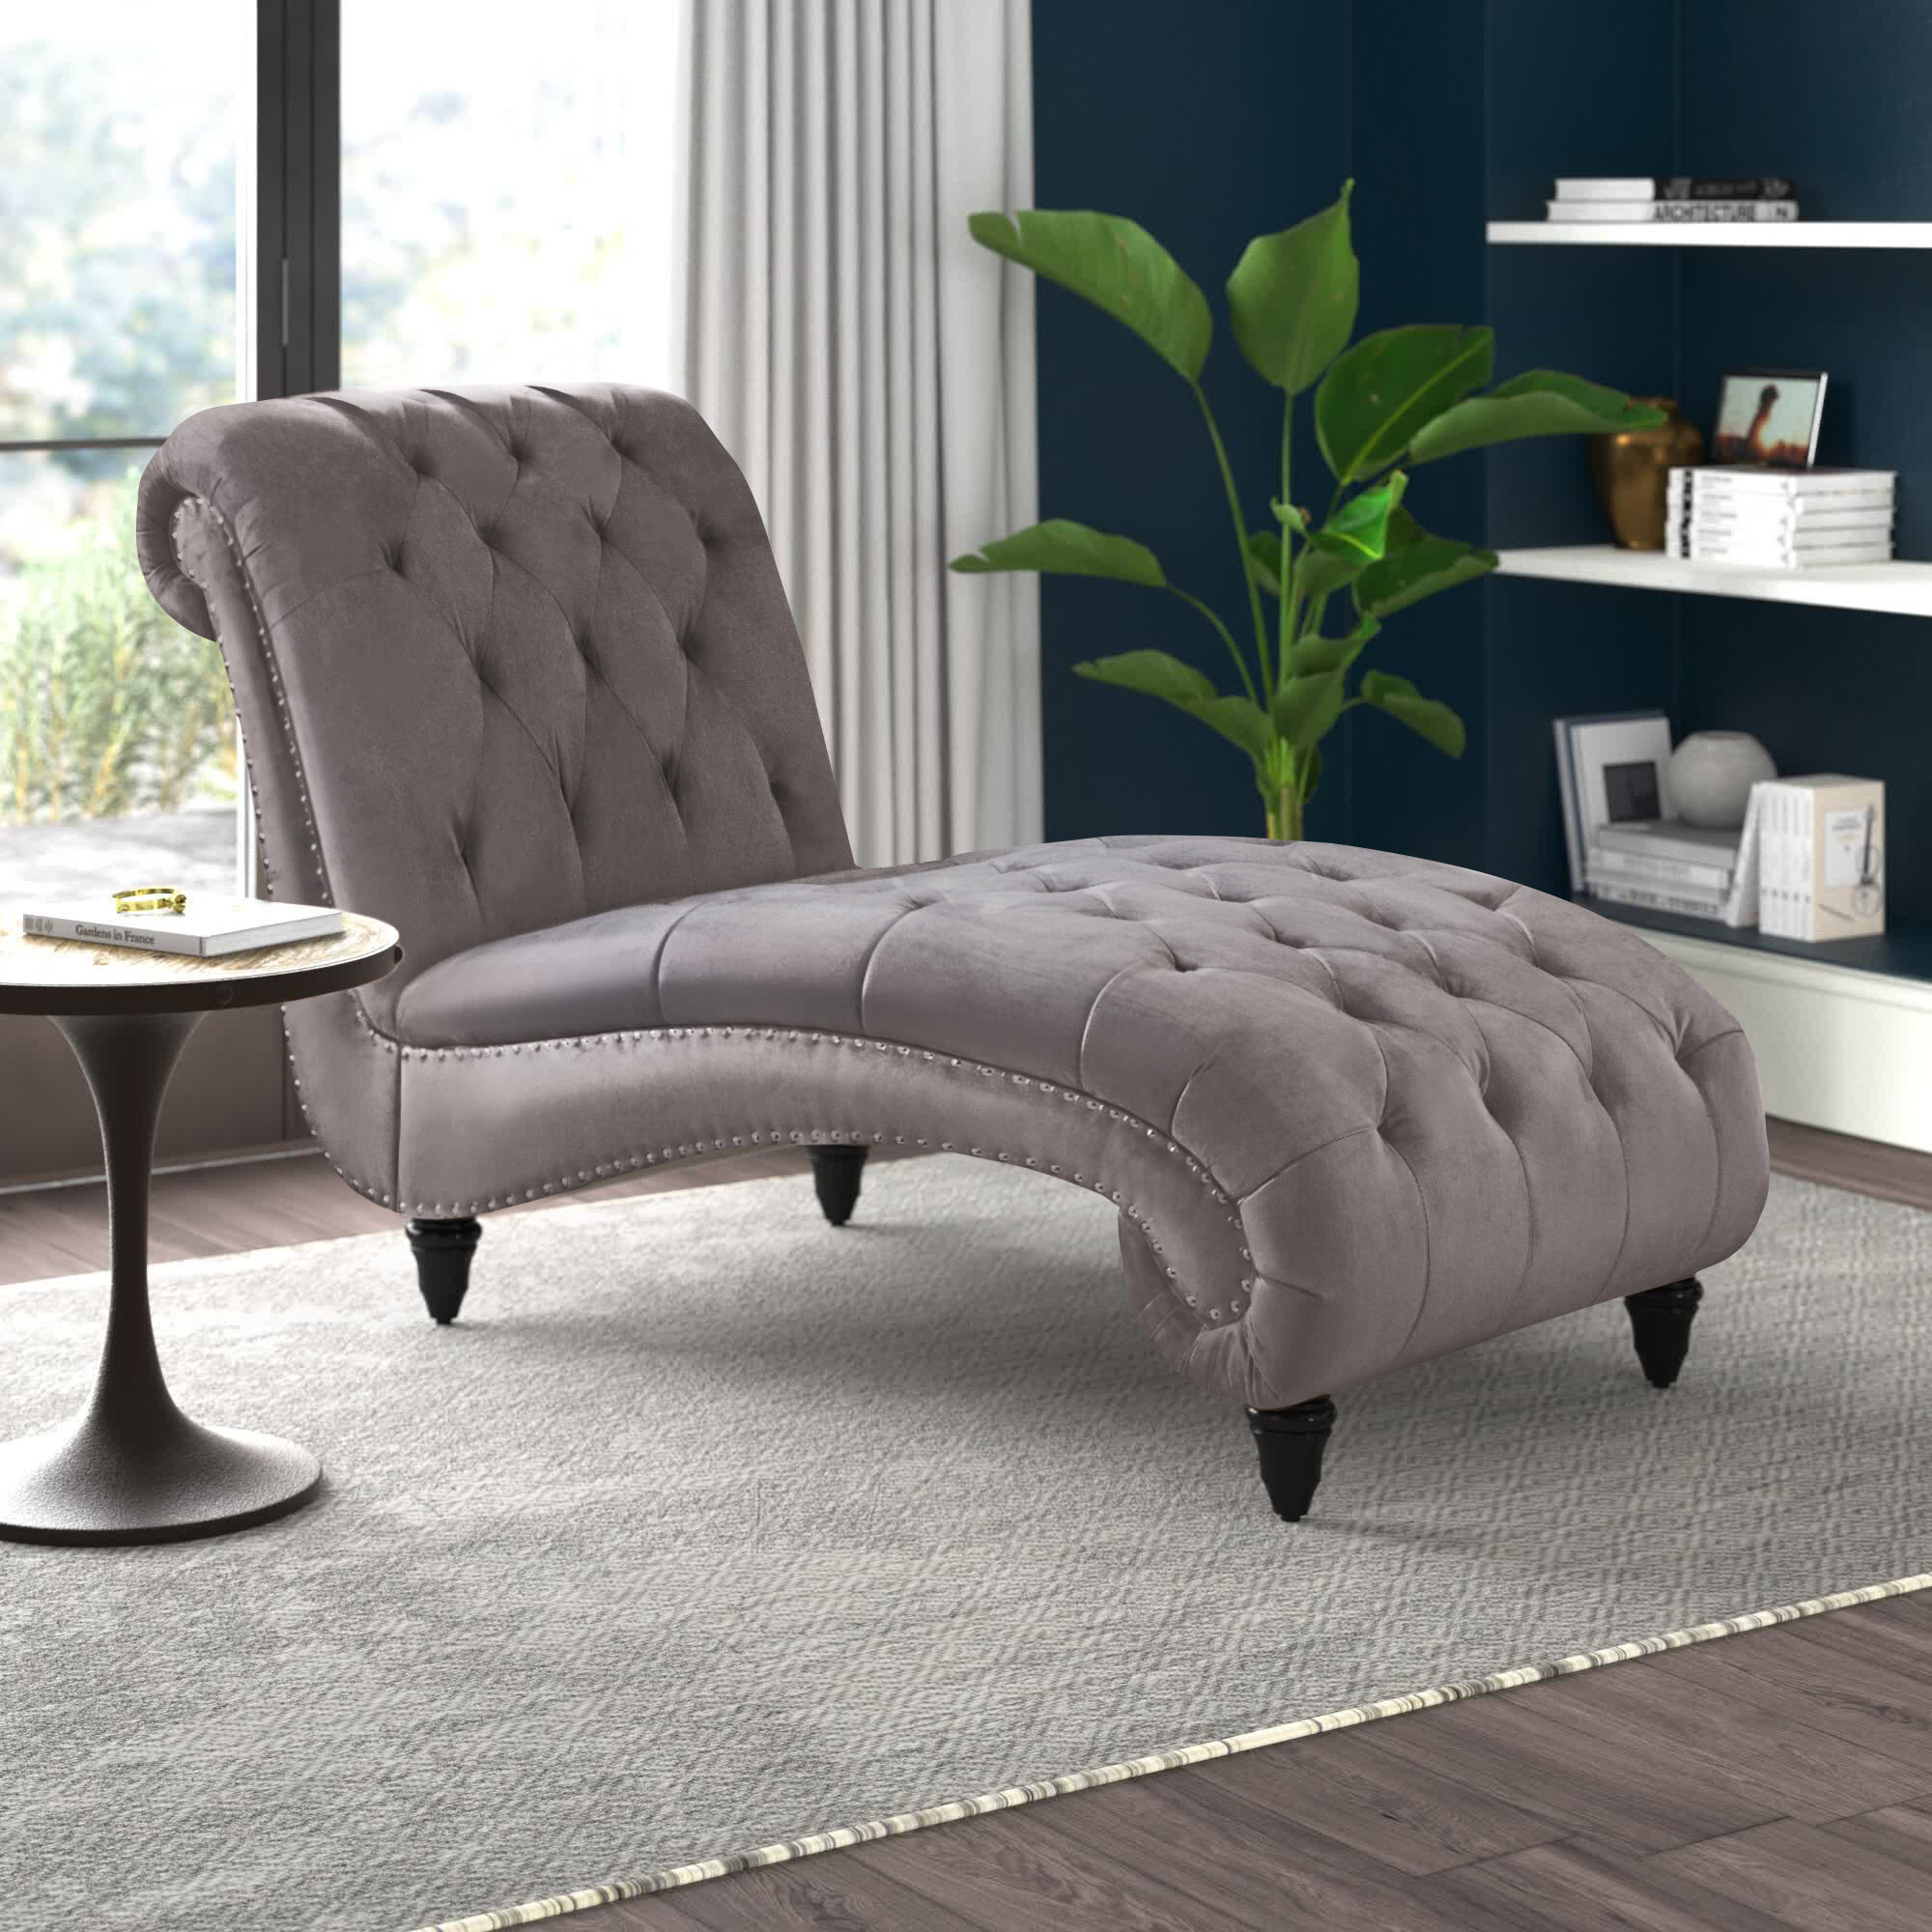 HomSof Chaise, Grey Modern Velvet Indoor, Left Arm Design Lounge Sofa, Reclining Chair Solid Wood Legs with 1 Pillow